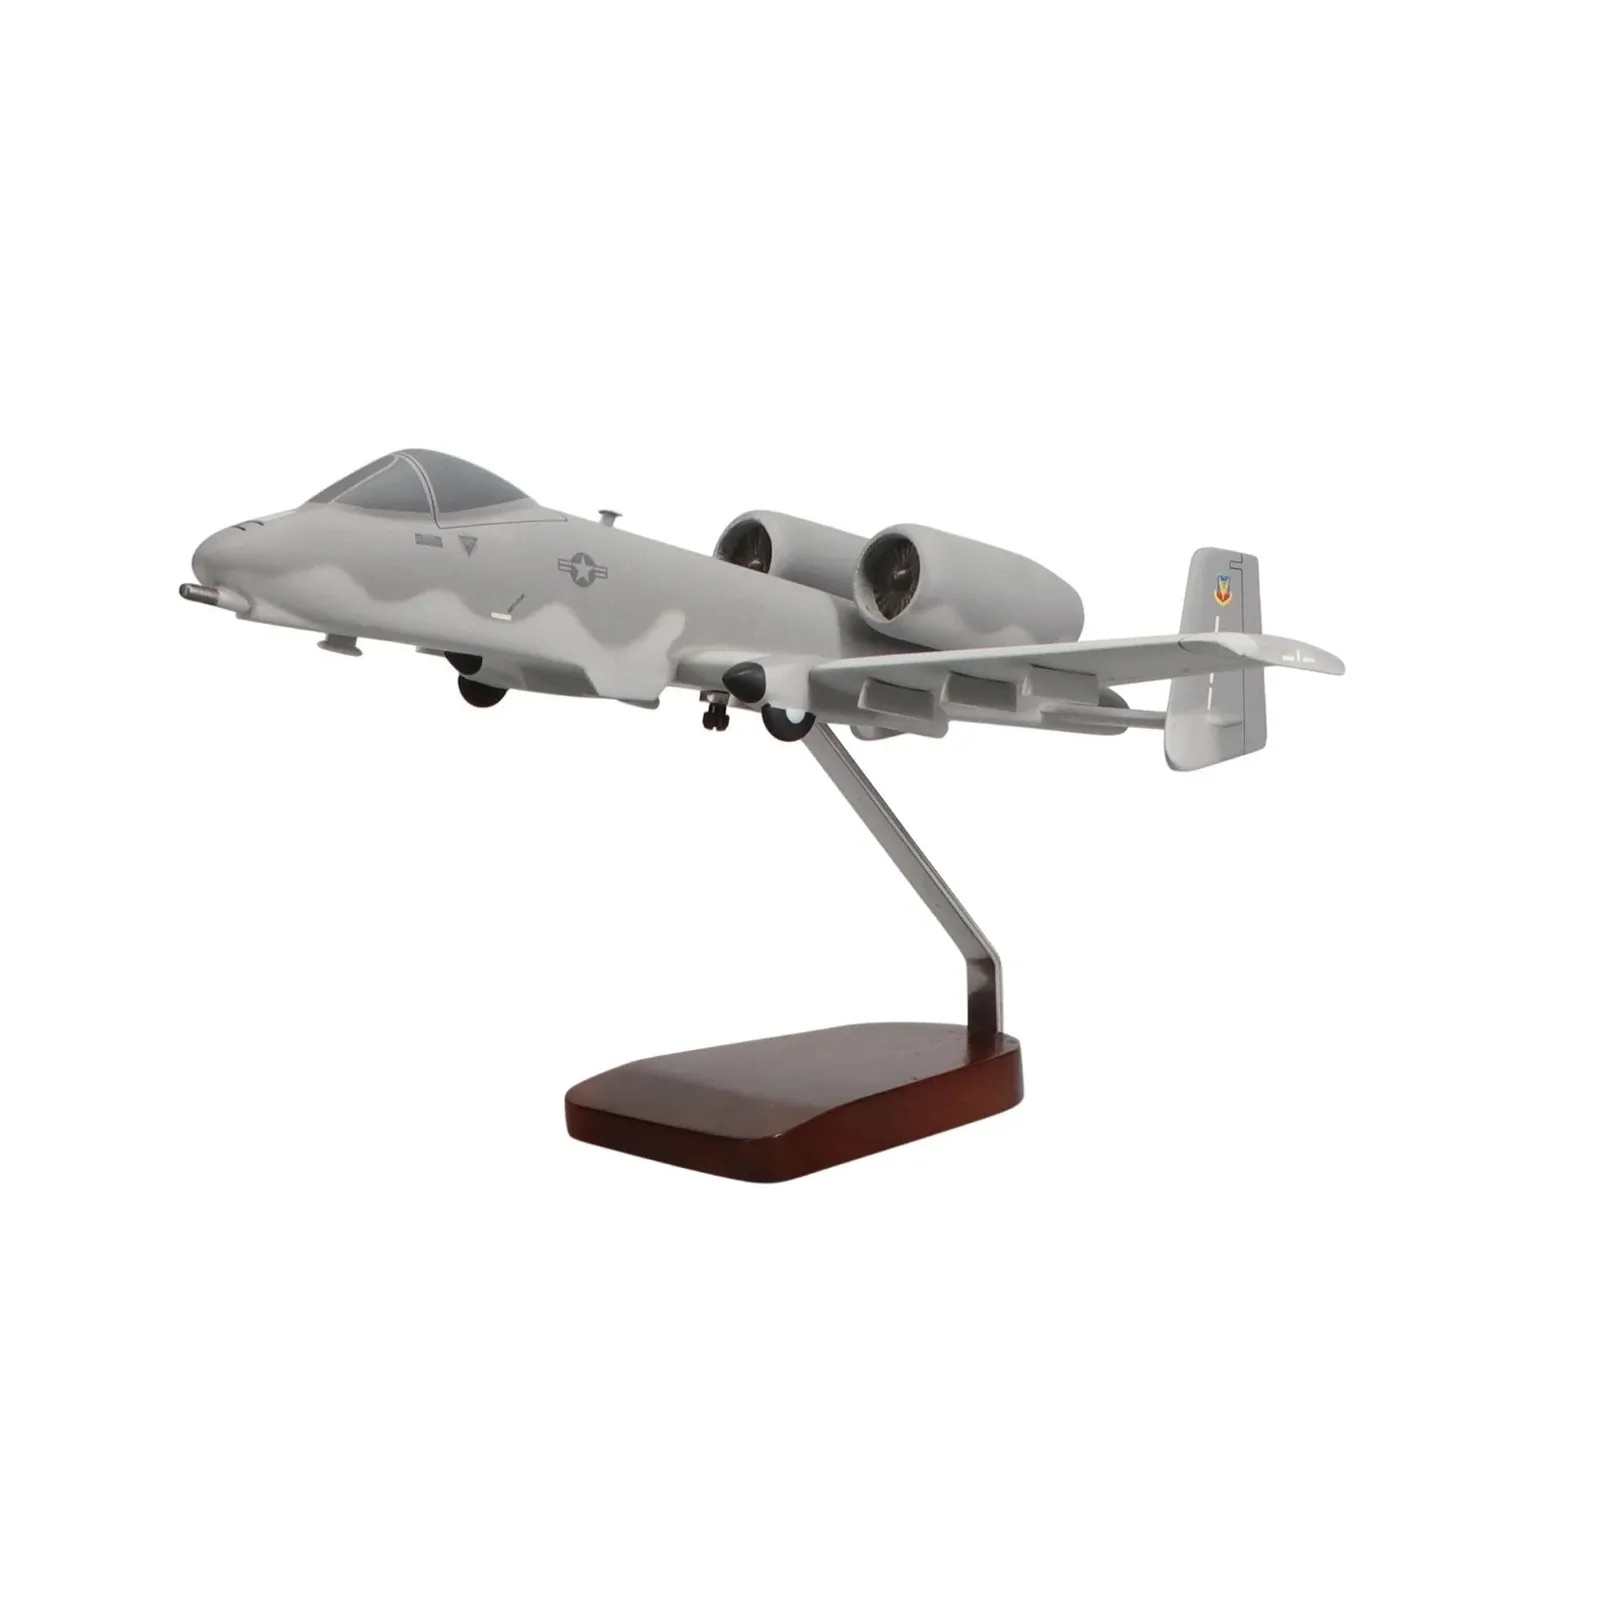 A10 Warthog Scale Model - Image 3 of 4